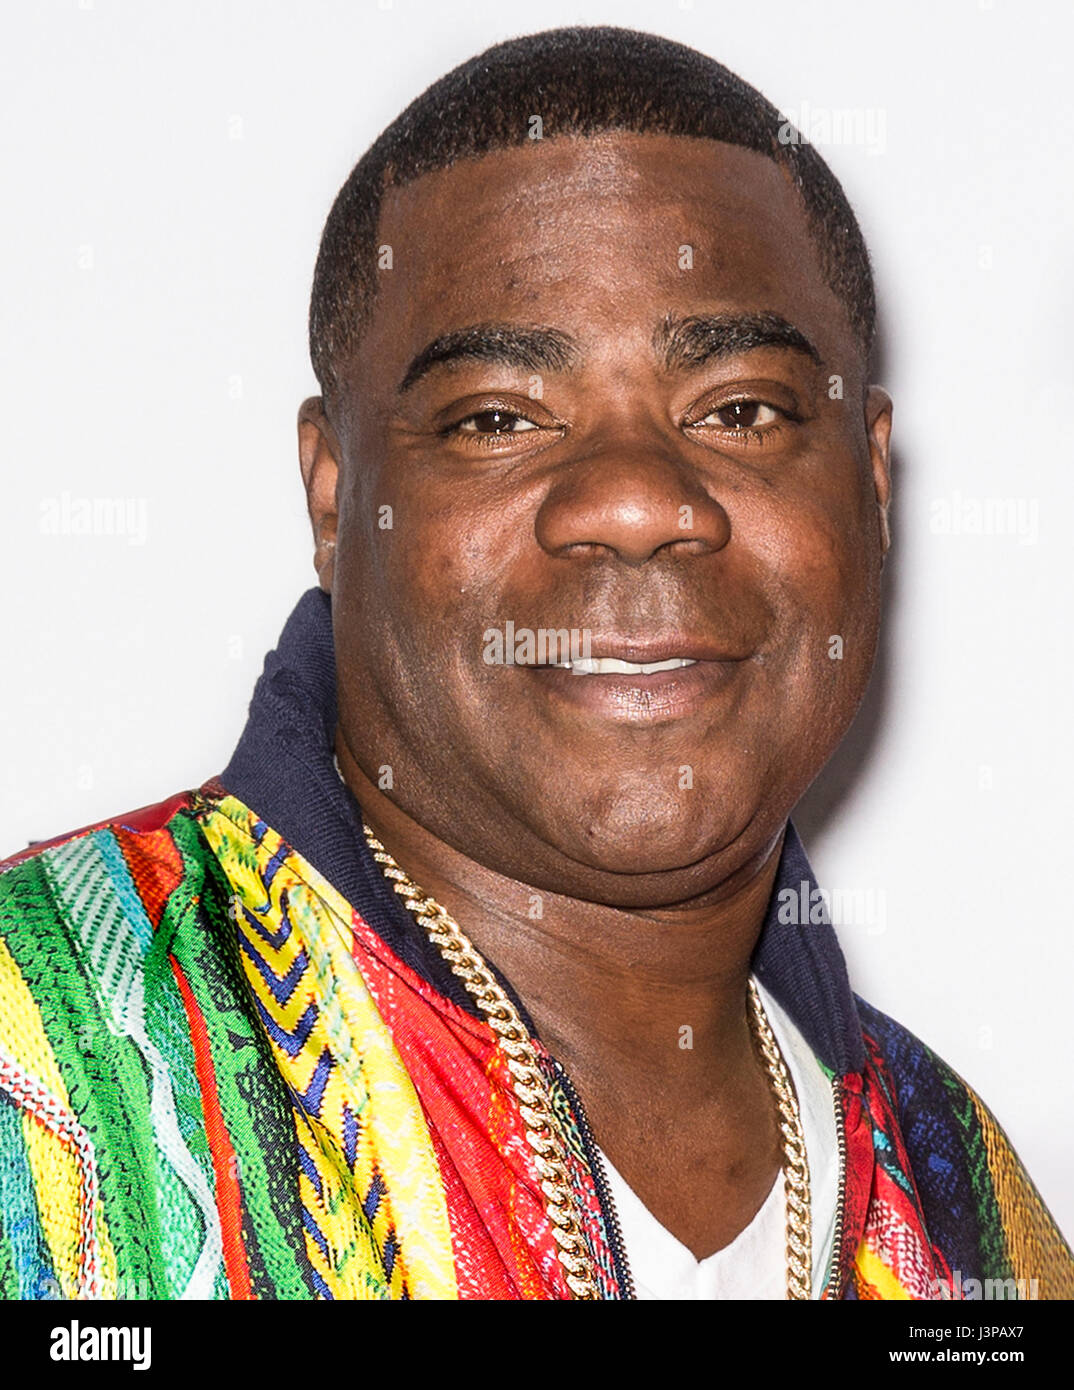 NEW YORK, NY - APRIL 23, 2017: Tracy Morgan attends 'The Clapper' Premiere during the 2017 Tribeca Film Festival at SVA Theatre Stock Photo